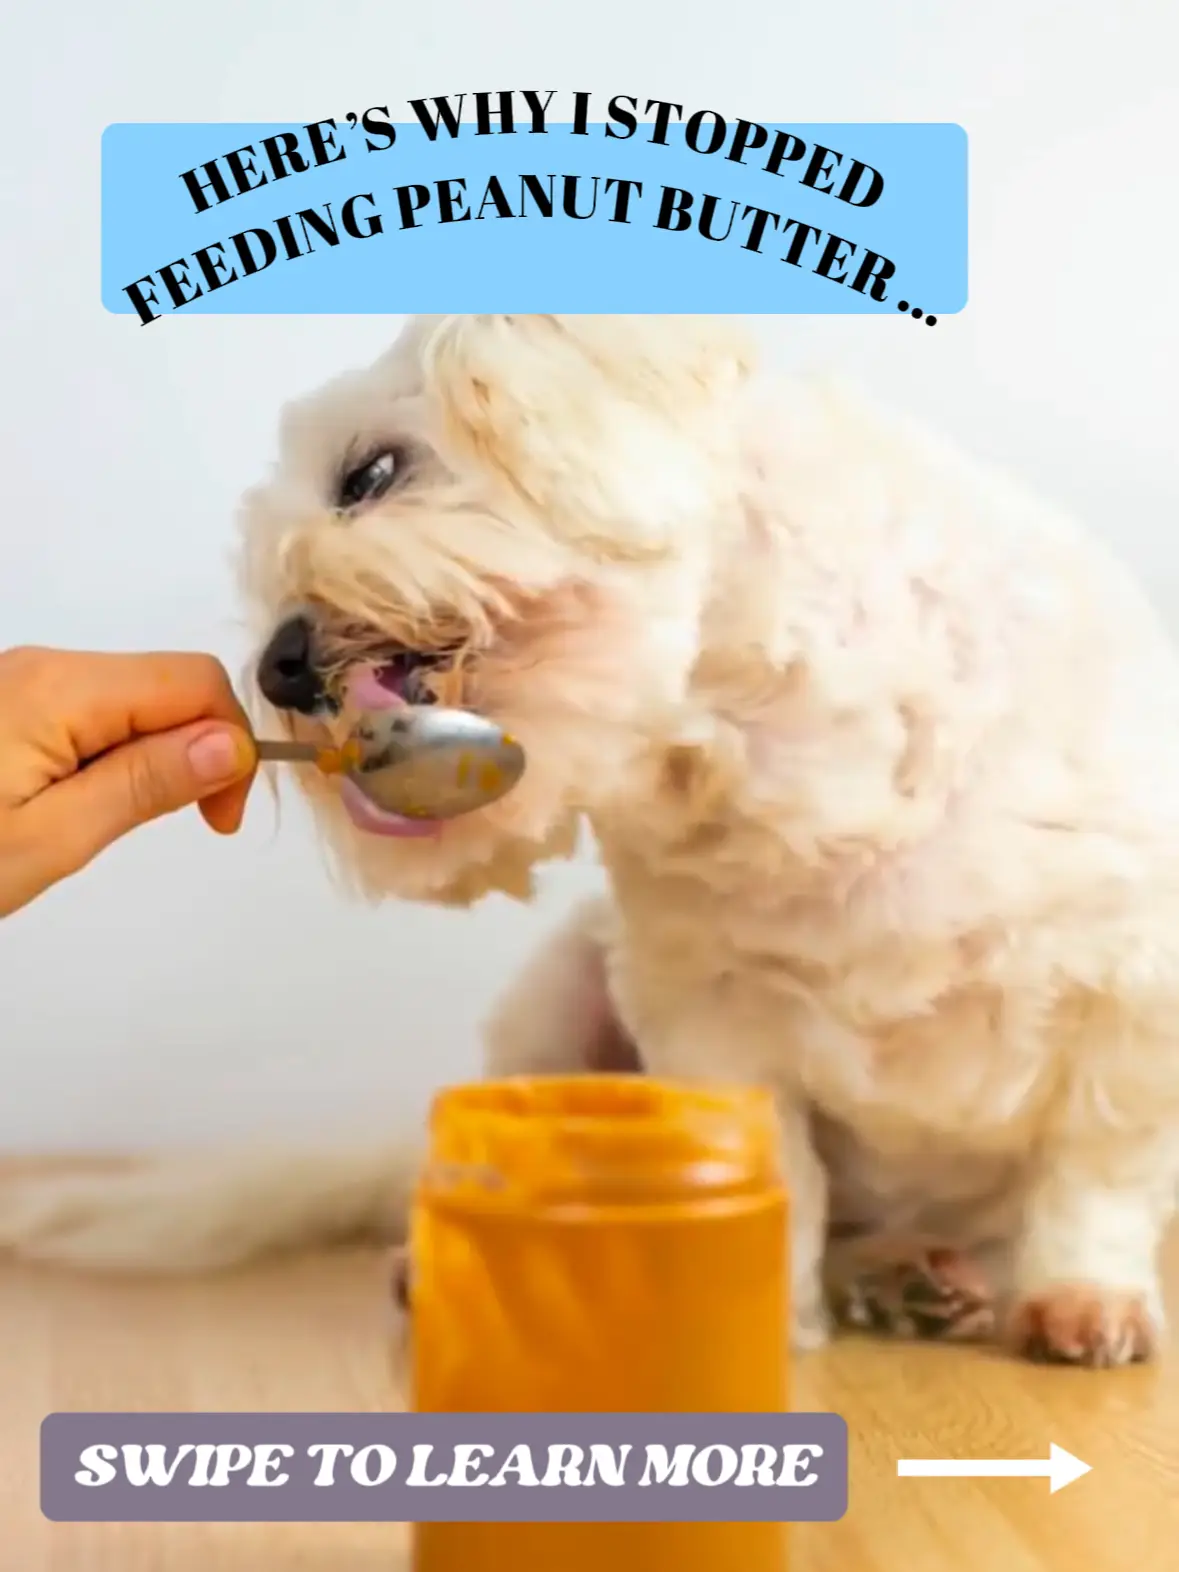 Why I STOPPED feeding peanut butter!, Gallery posted by Rachel Fusaro🐶